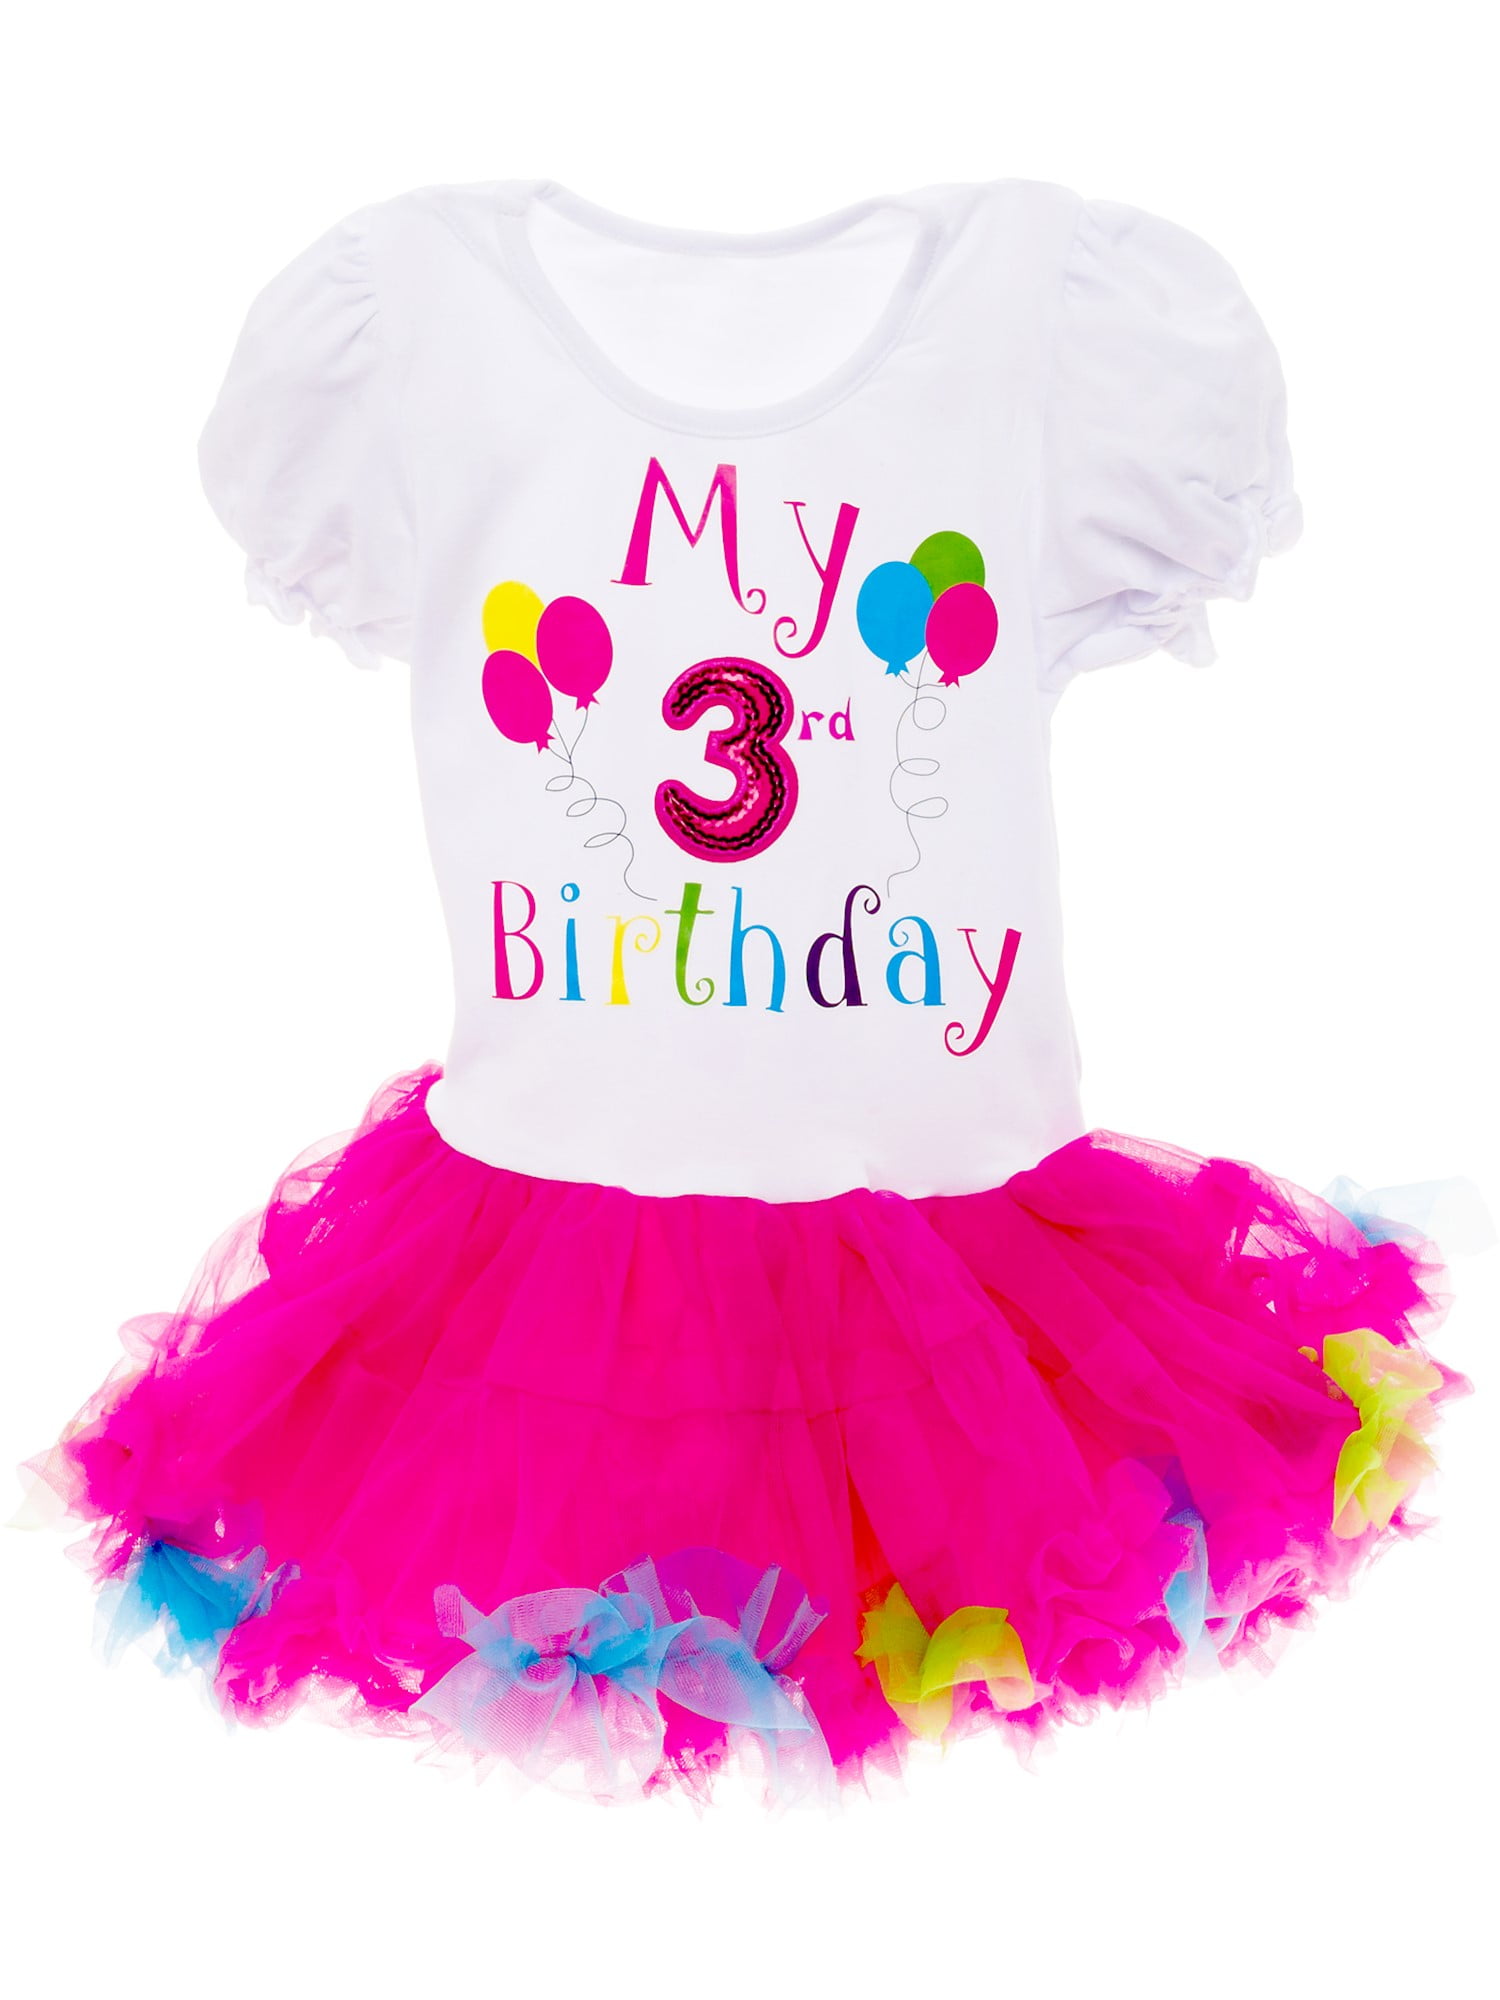 its my birthday outfit